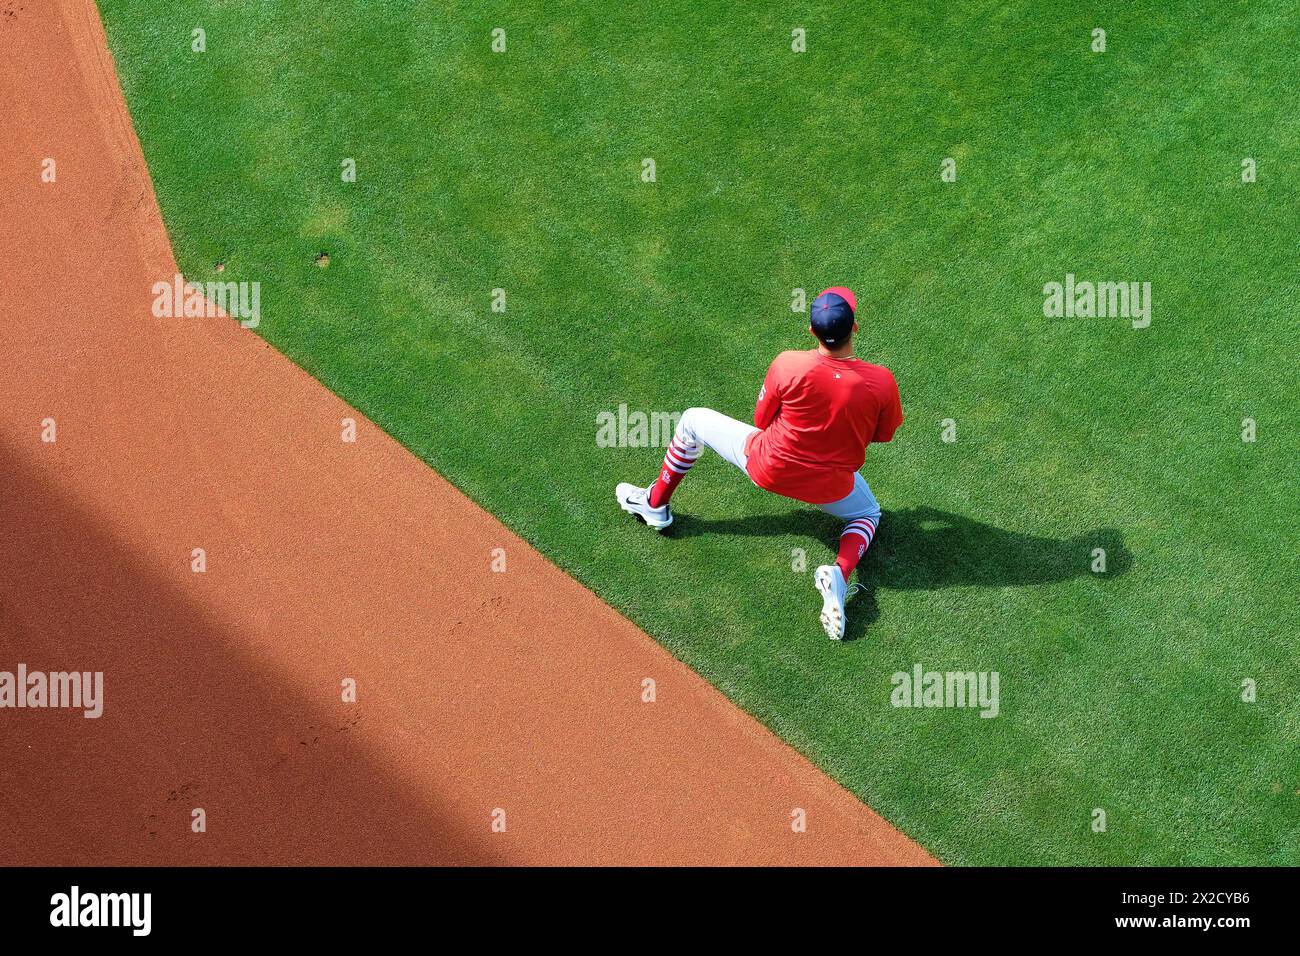 Professional baseball player stretches and warms up; St. Louis Cardinals pregame routine to get ready for a ballgame; Oakland Coliseum, California. Stock Photo